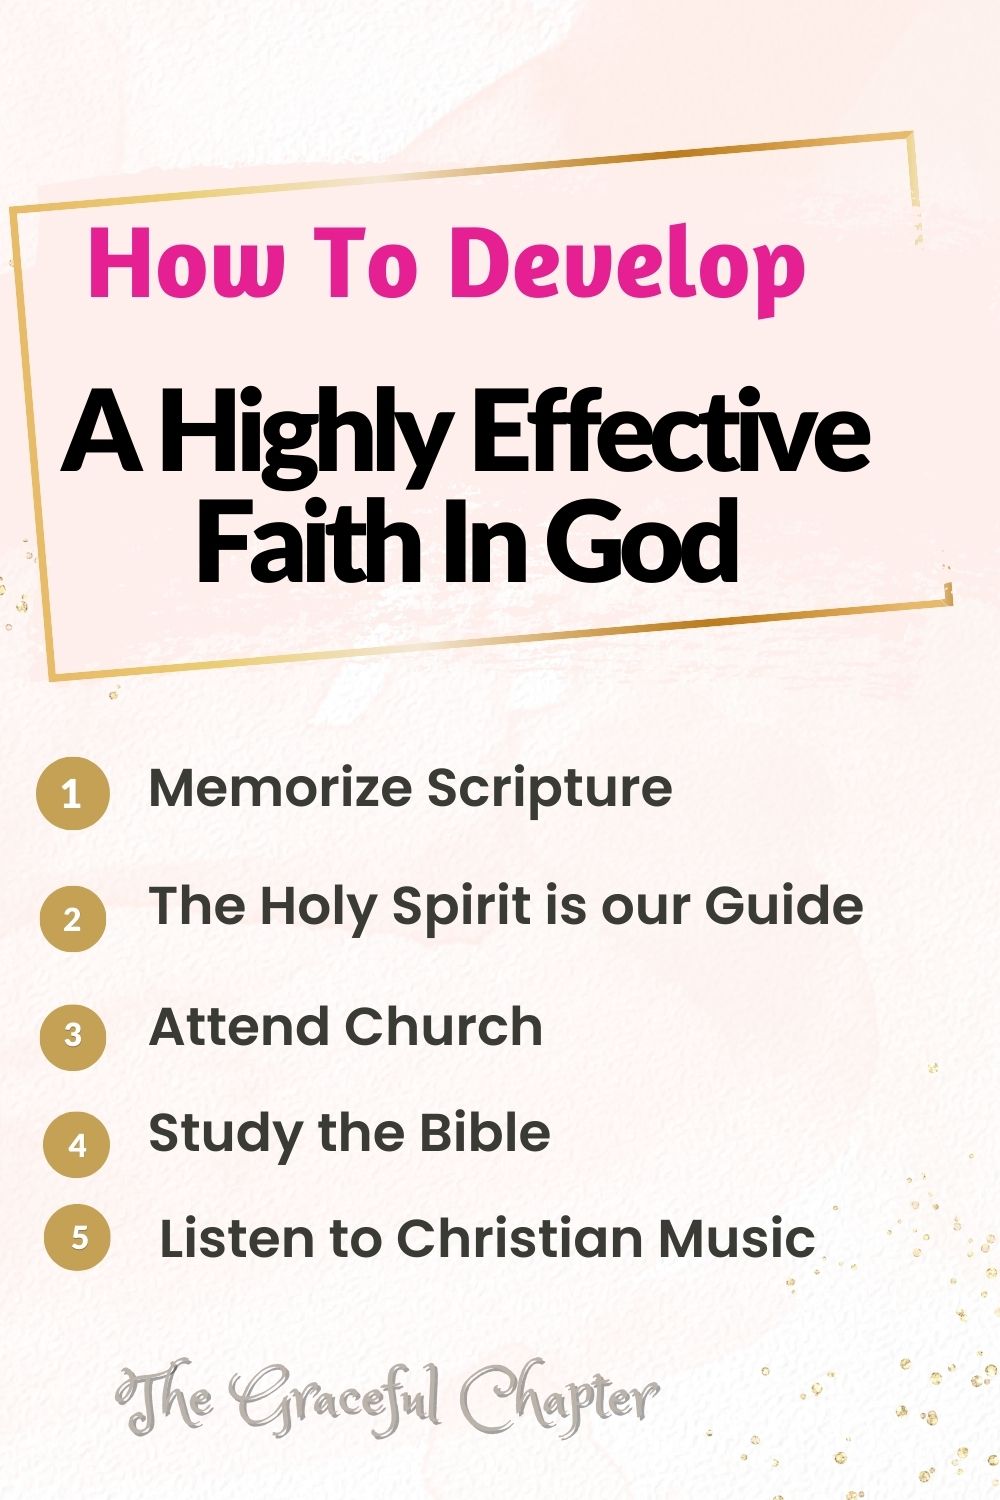 How To Develop A Highly Effective Faith In God?